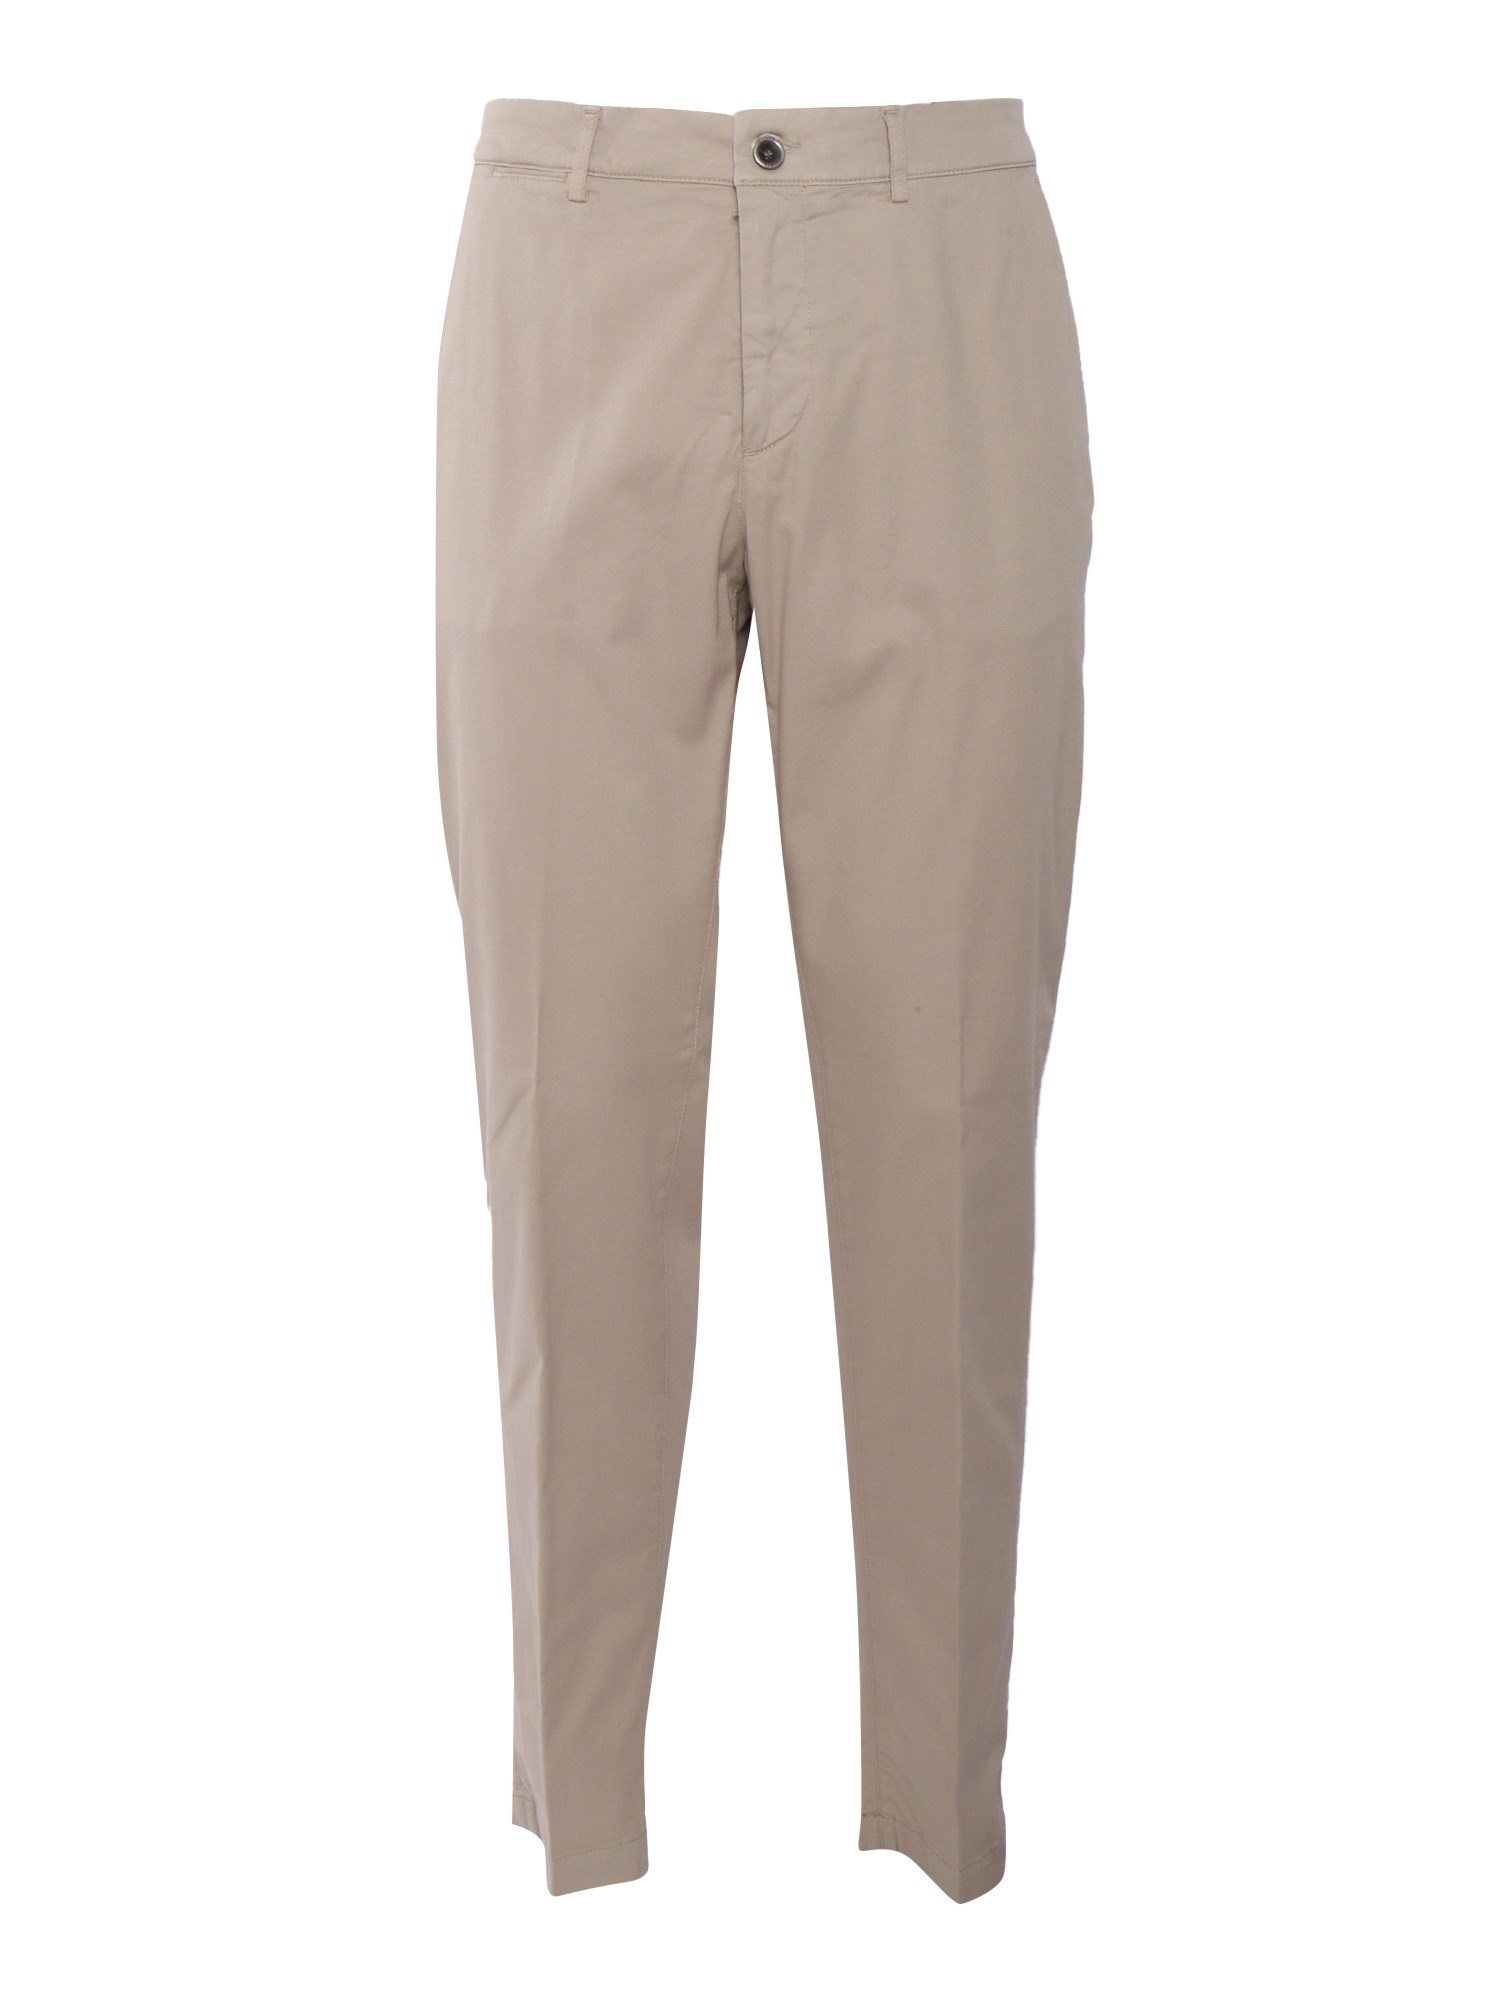 Shop Peserico Beige Trousers